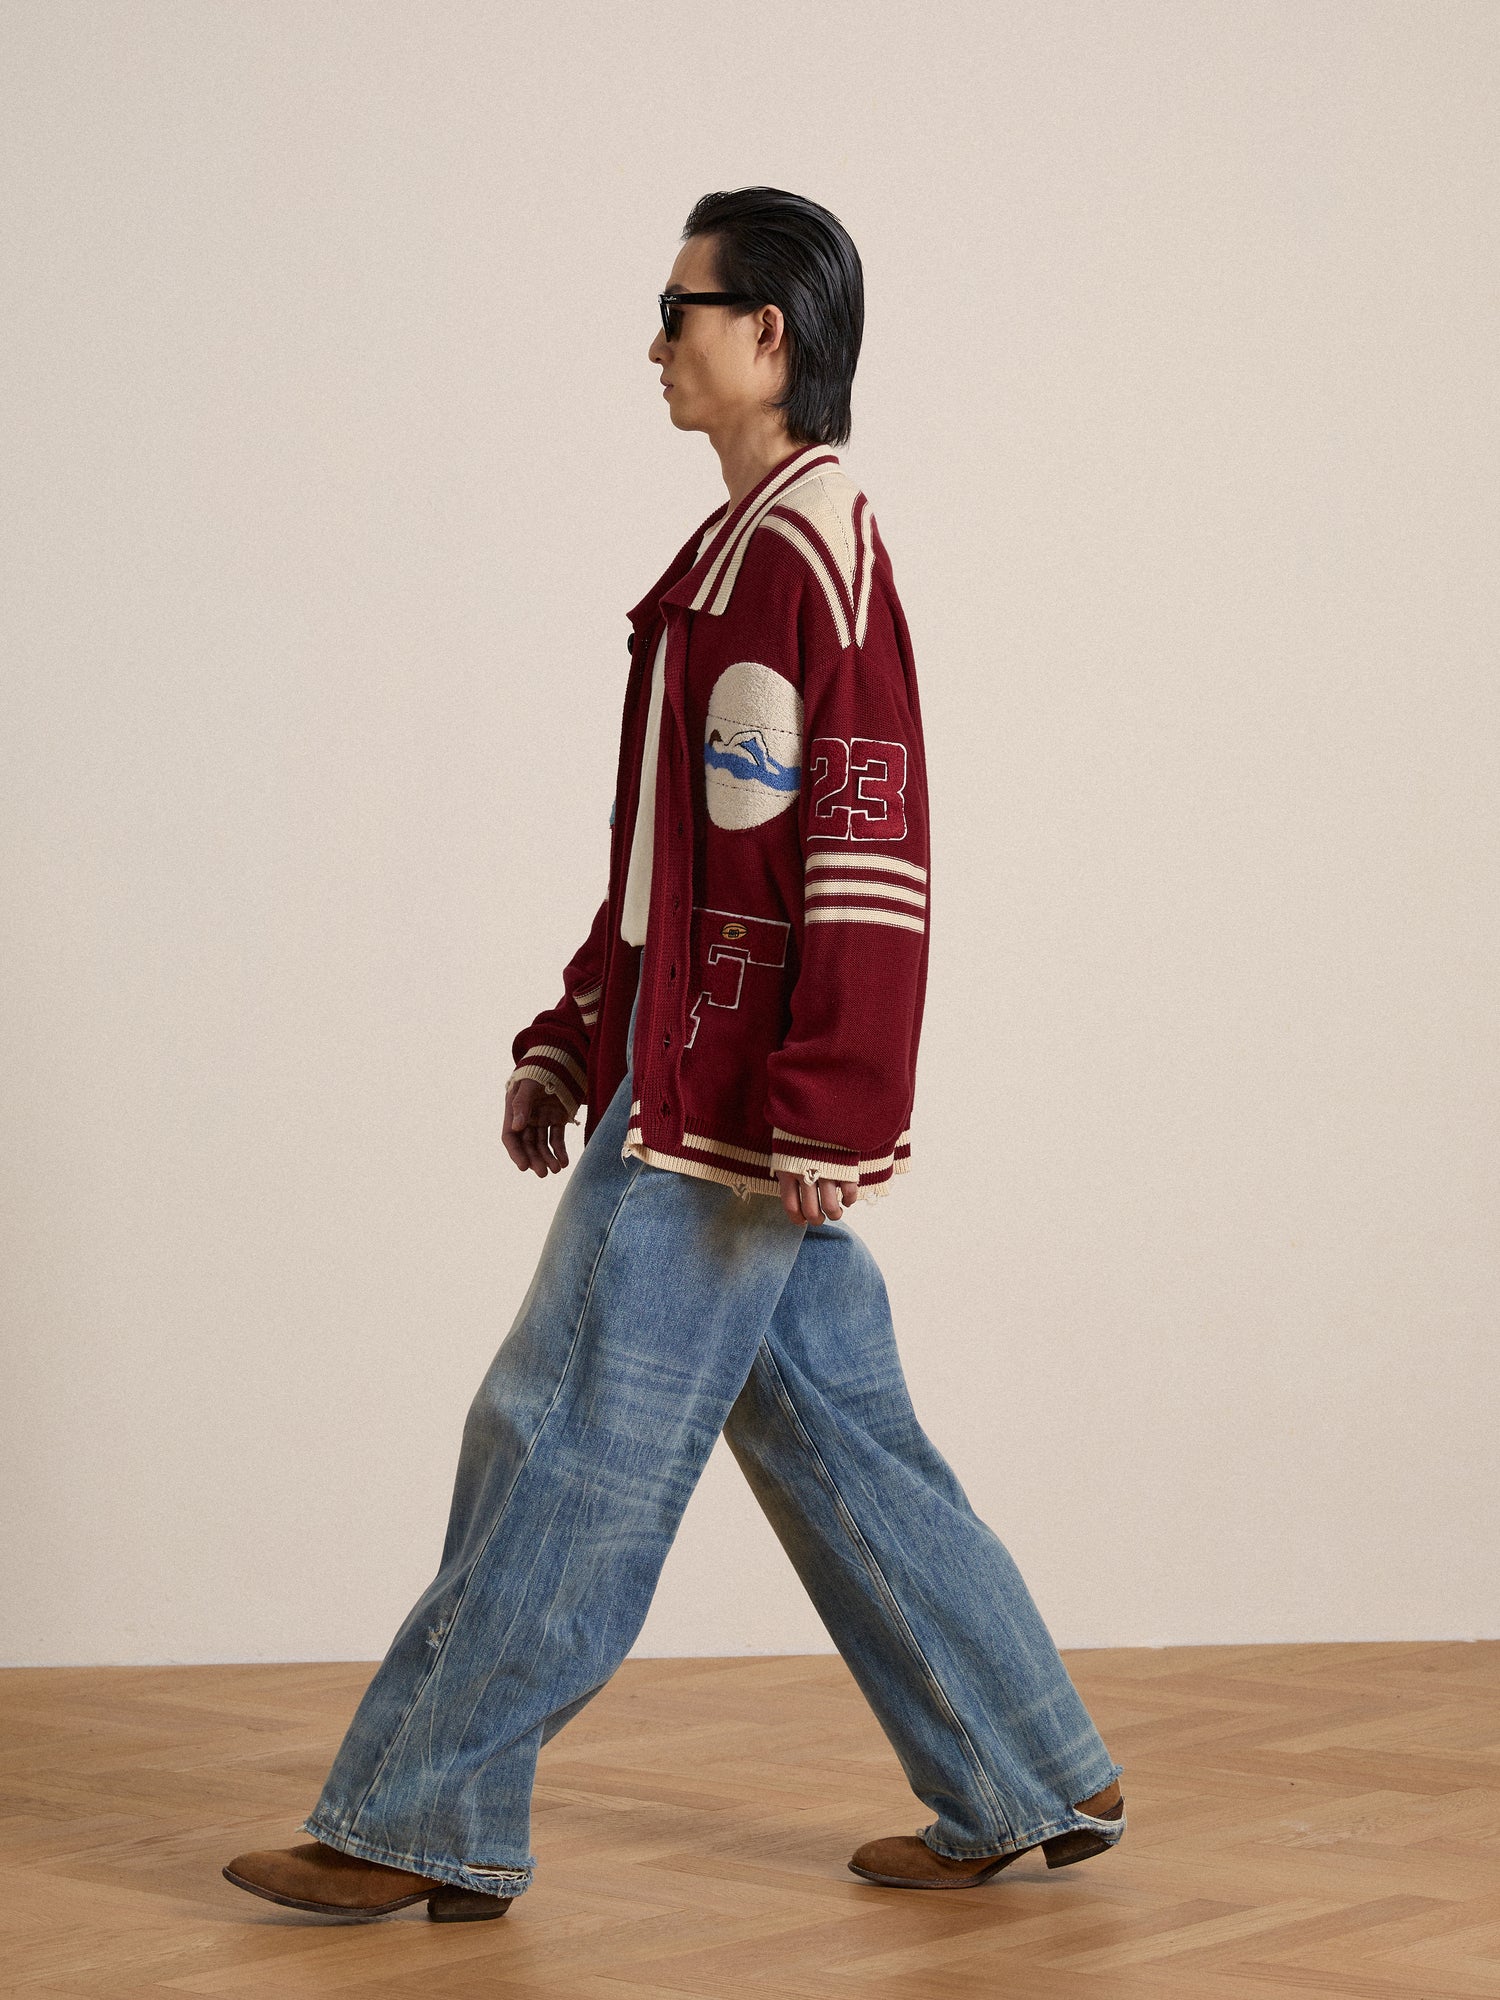 A man in a Found Fin Varsity Patch Collared Cardigan adorned with embroidered chenille patches and jeans walking on a wooden floor.